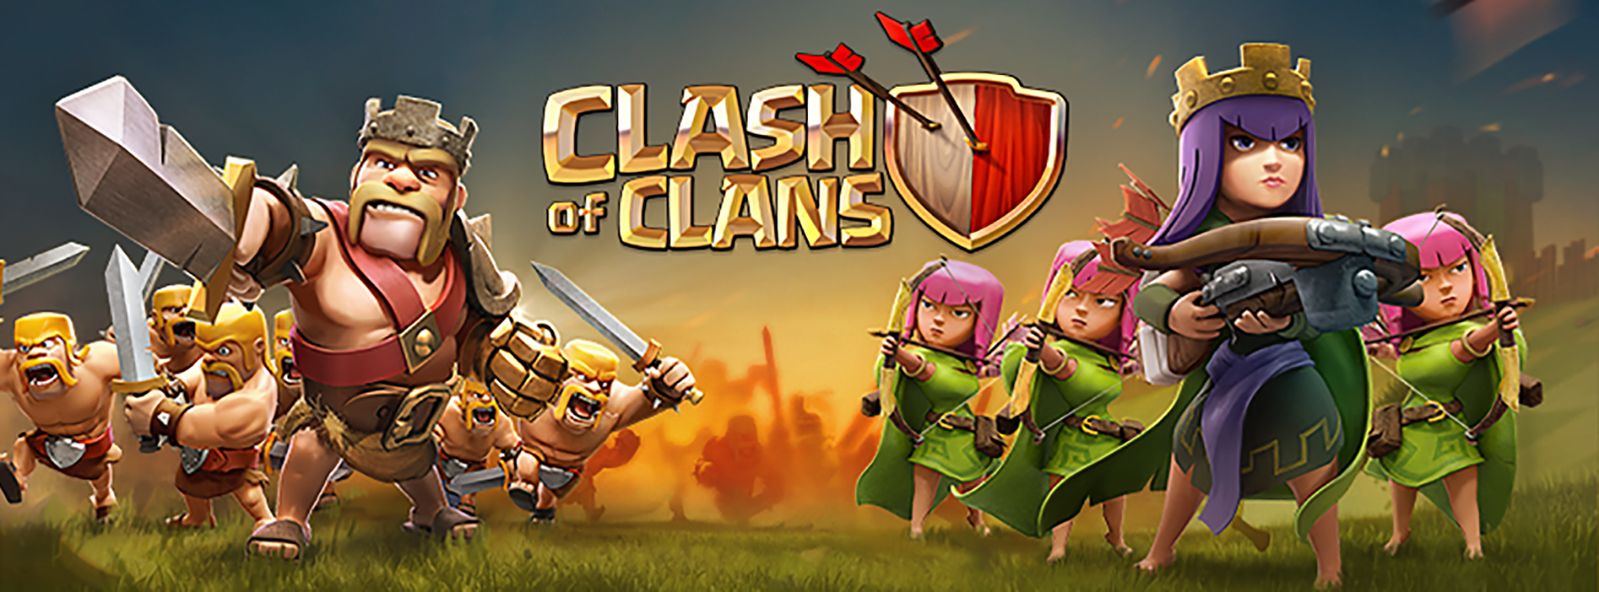 Clash of Clans heroes